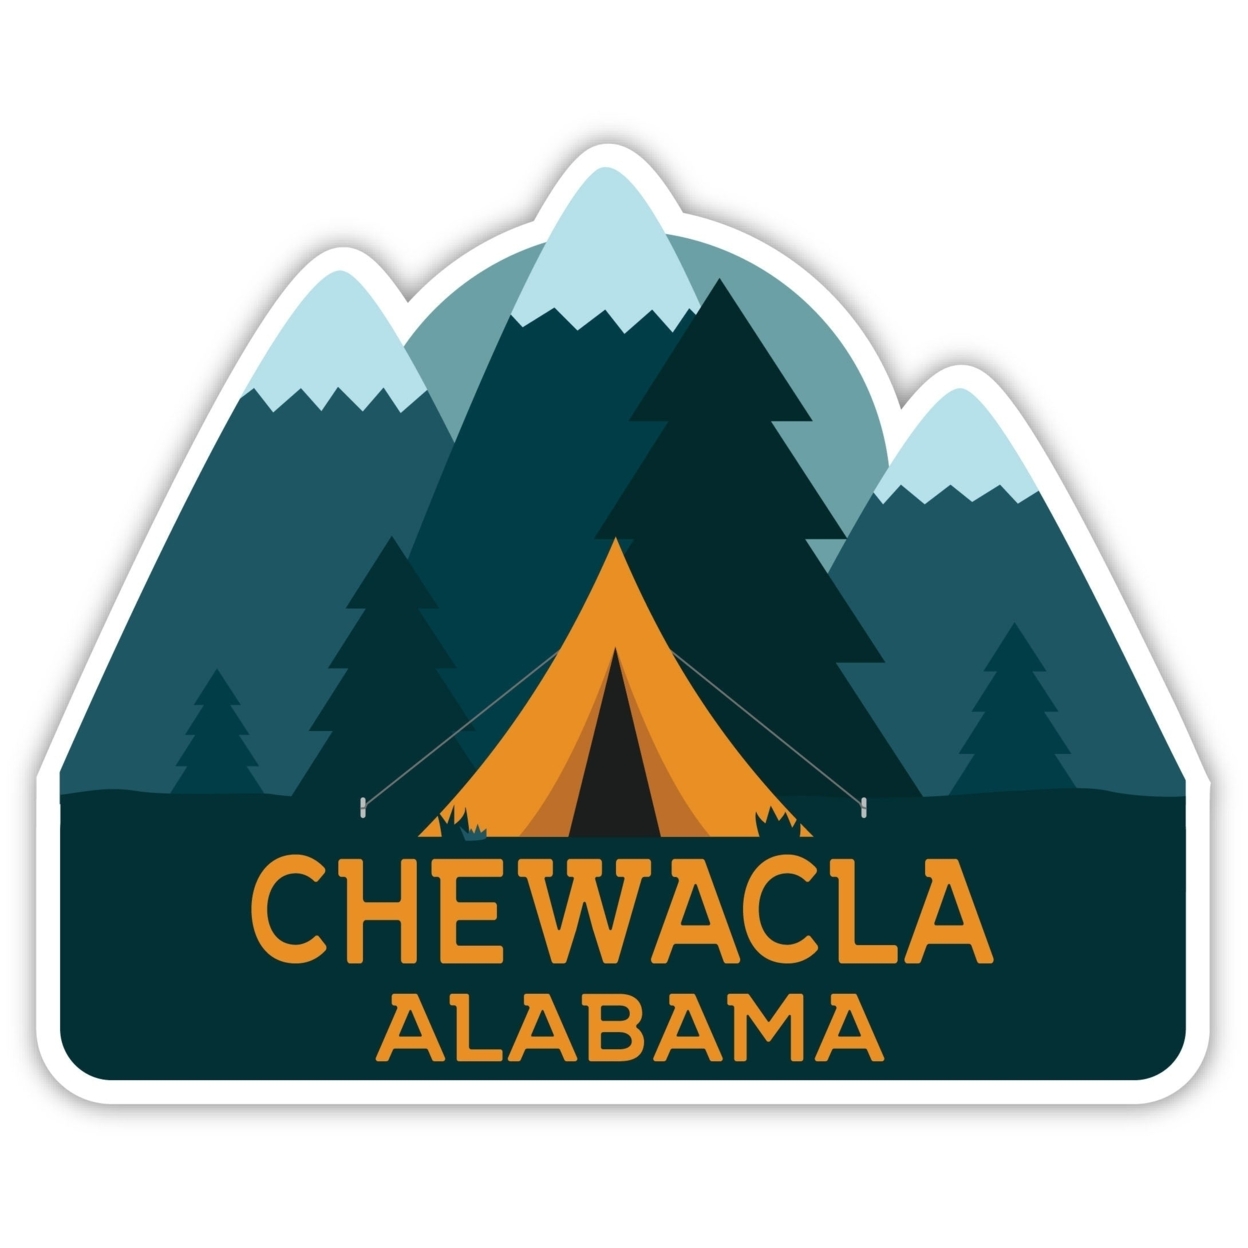 Chewacla Alabama Souvenir Decorative Stickers (Choose Theme And Size) - 4-Pack, 8-Inch, Tent